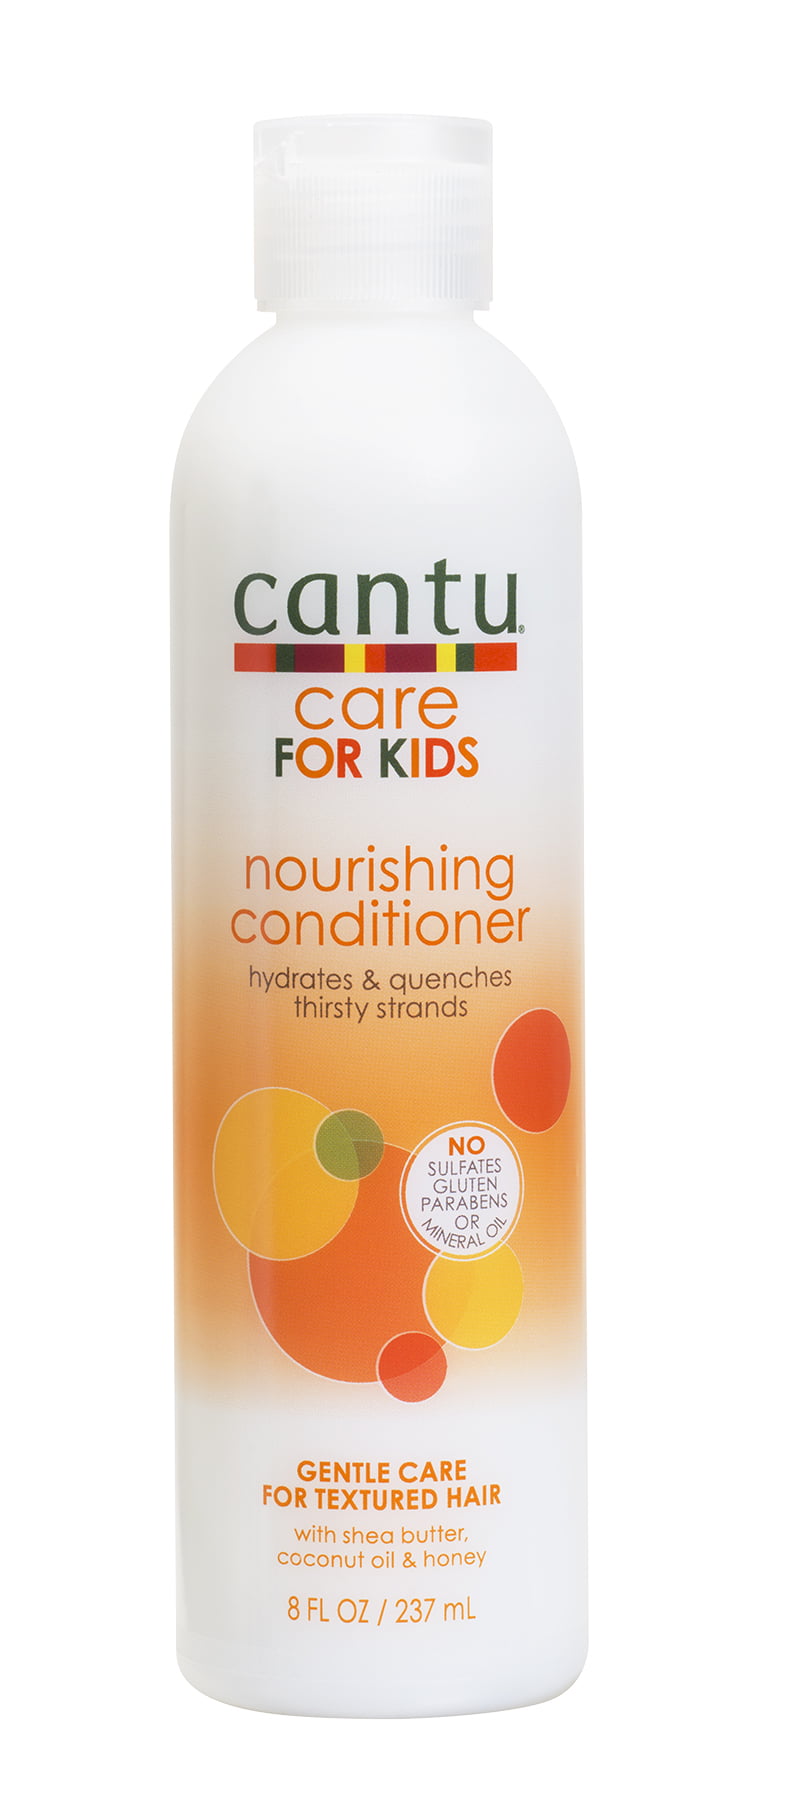 Cantu Care for Kids Nourishing Conditioner with Shea Butter, Coconut Oil, and Honey, 8 oz.